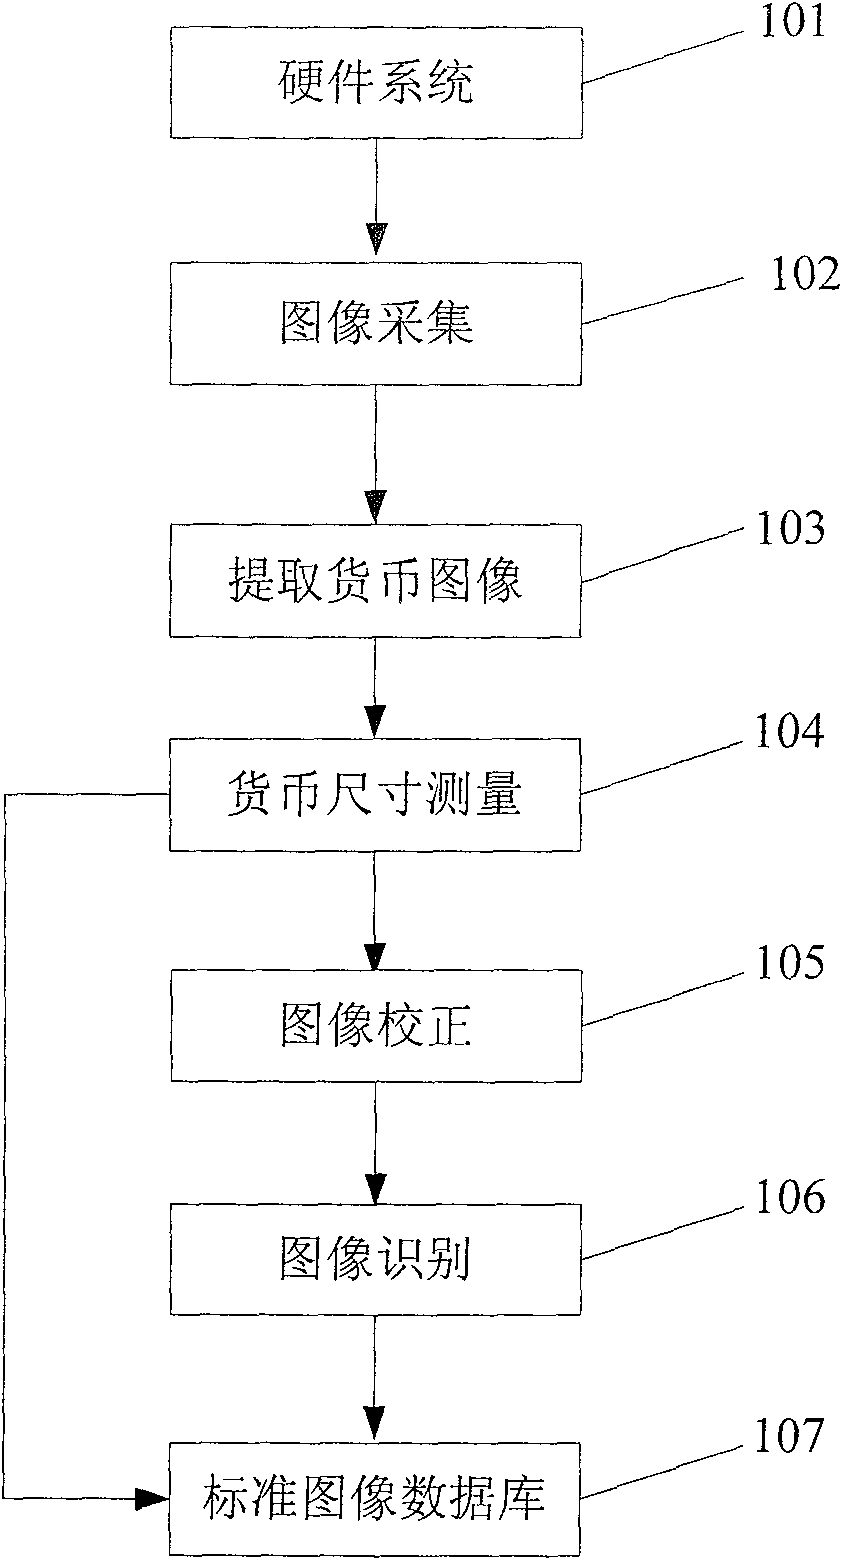 Two-dimensional currency automatic recognition method and system